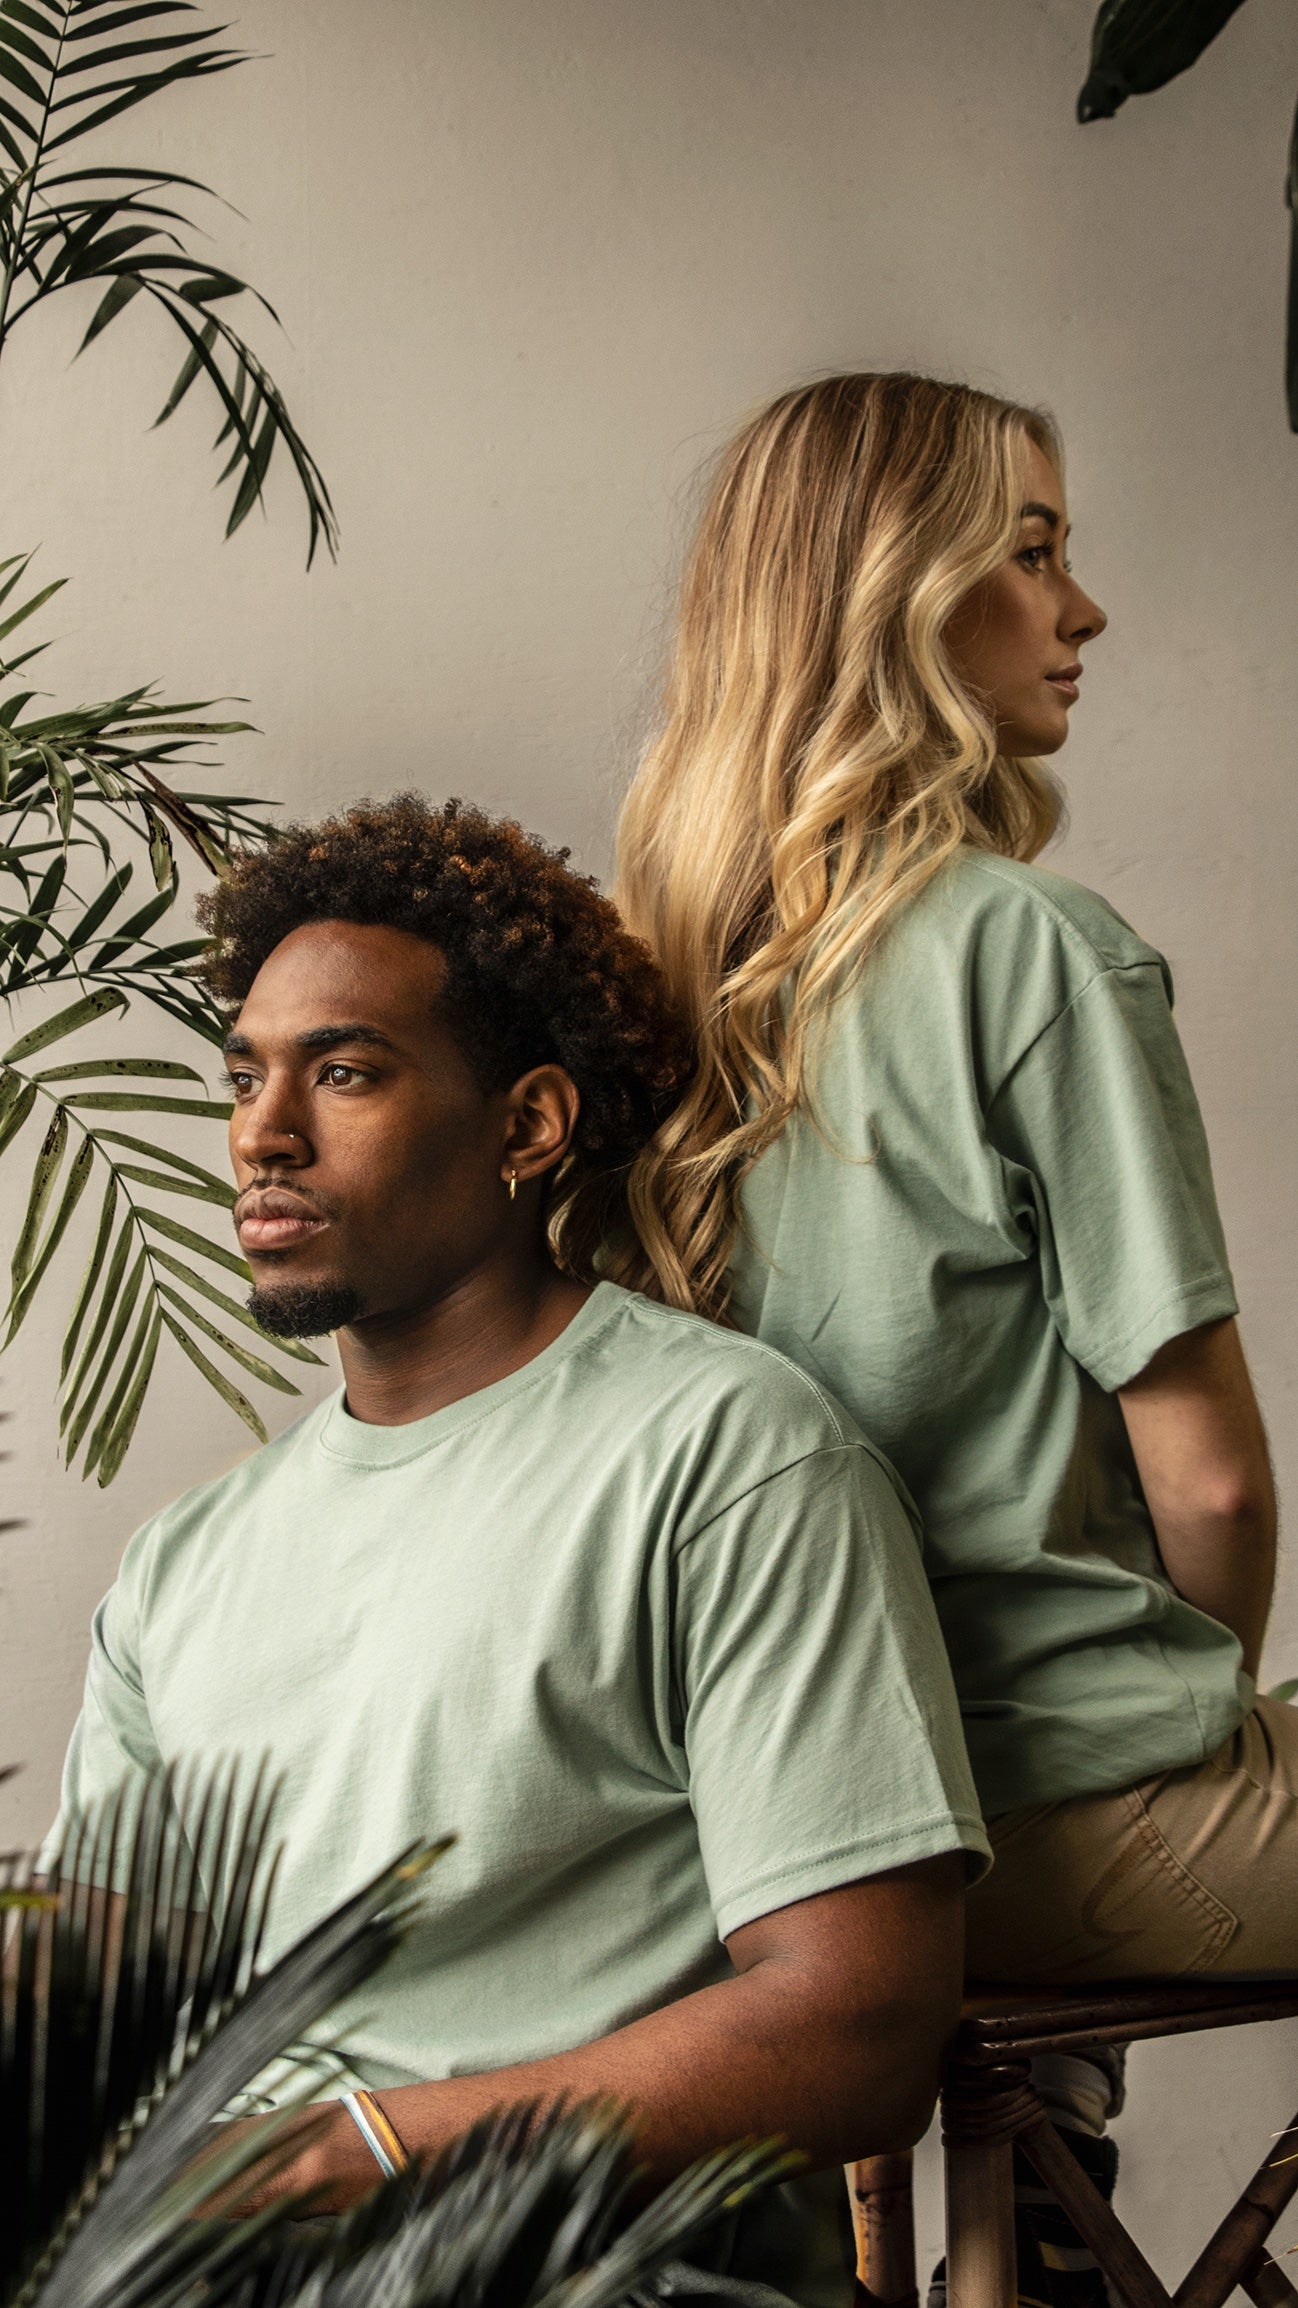 Nature Backs Short Sleeve 100% Organic Cotton T-Shirt | Minimalist Bay Short Sleeve made with Eco-Friendly Fibers Sustainably made in the USA 